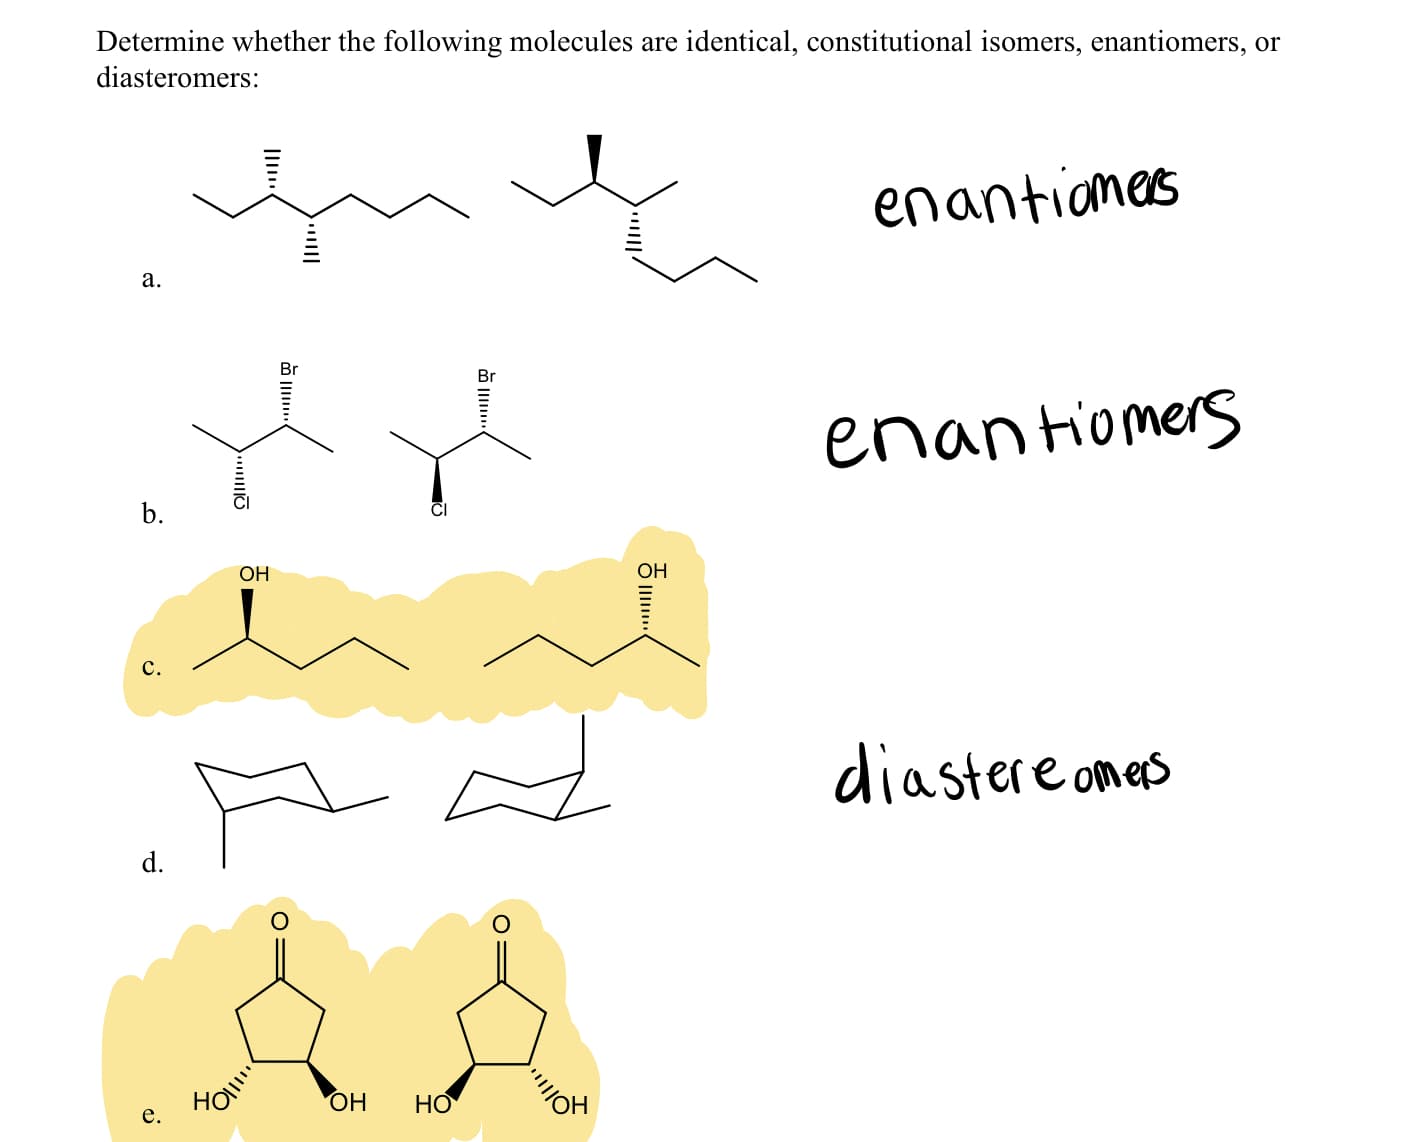 identical, constitutional isomers, enantiomers,
